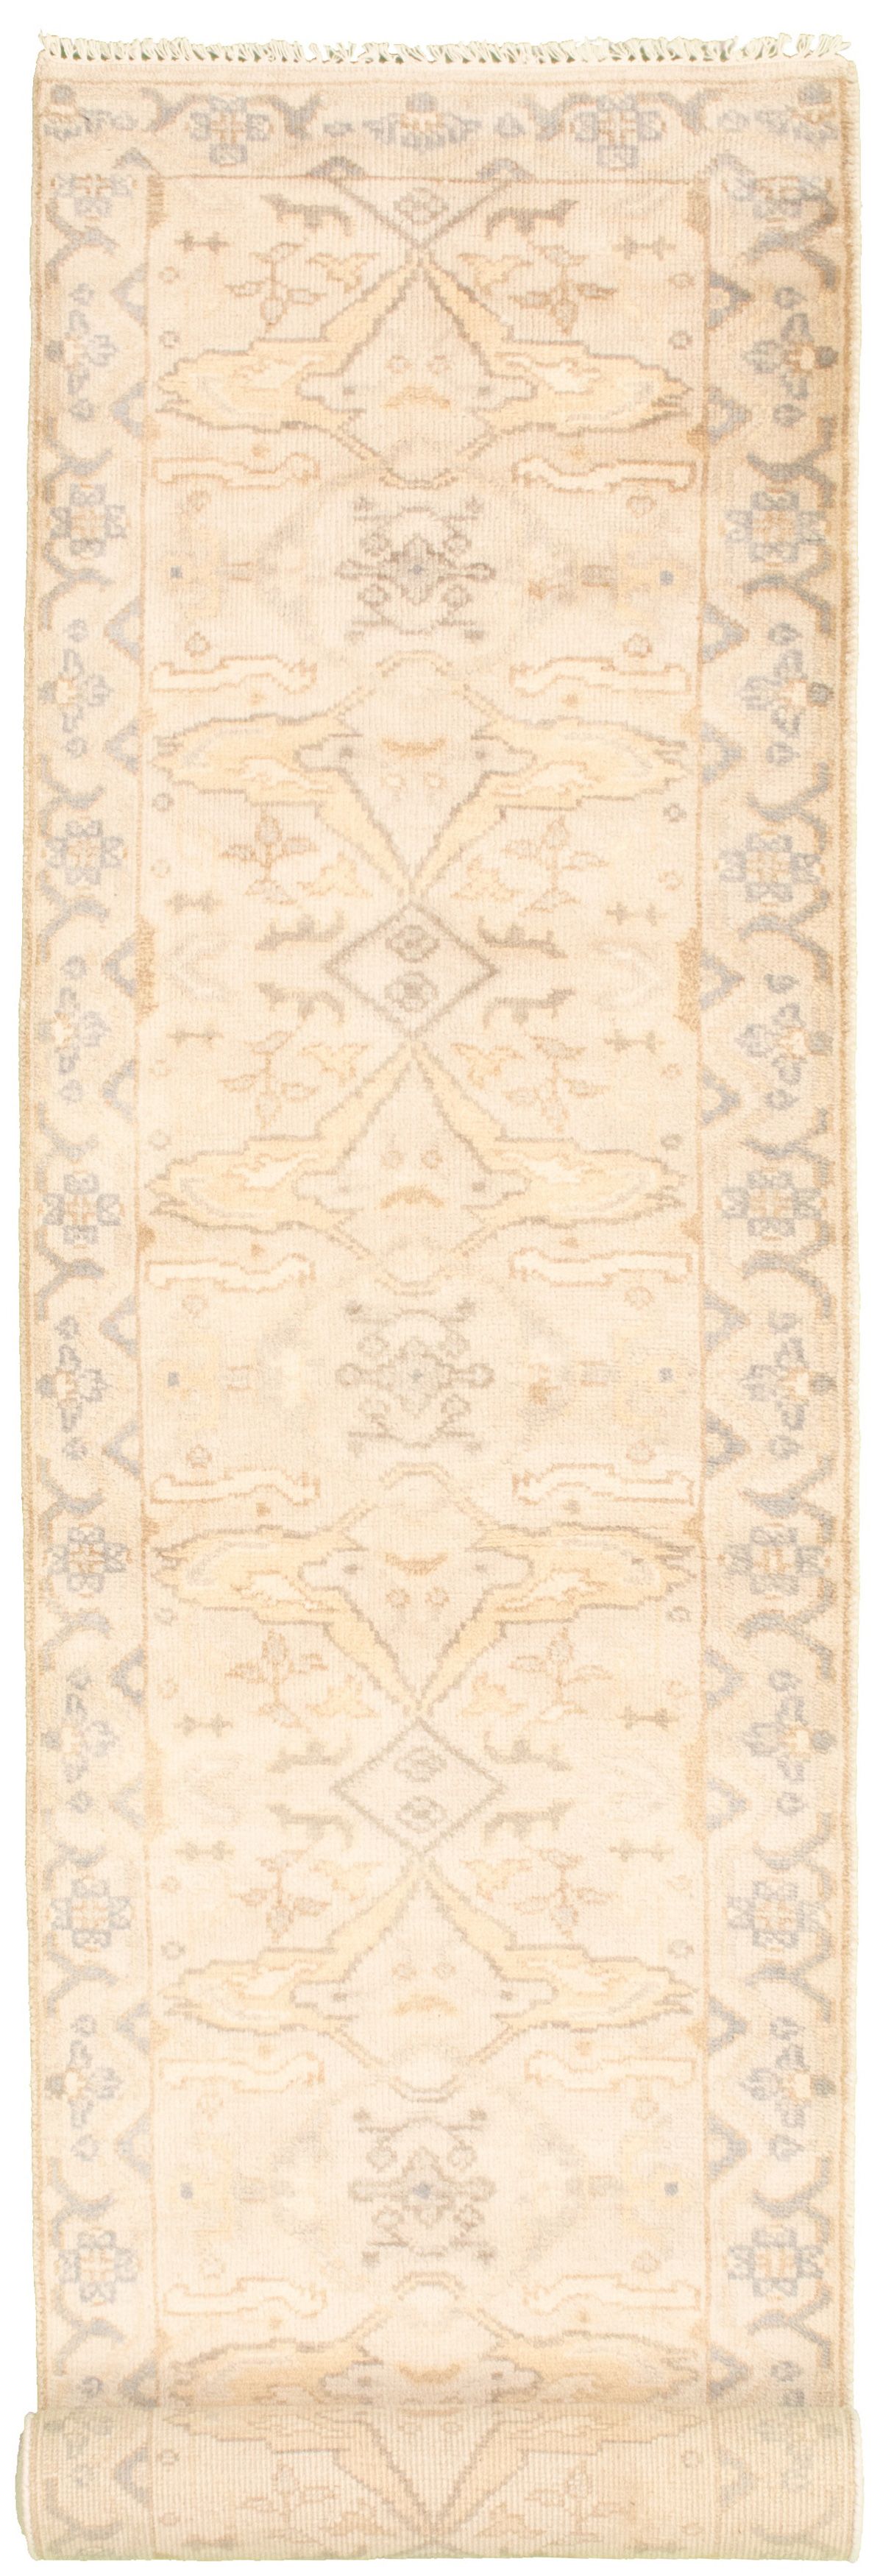 Hand-knotted Royal Ushak Beige Wool Rug 2'6" x 13'8" Size: 2'6" x 13'8"  